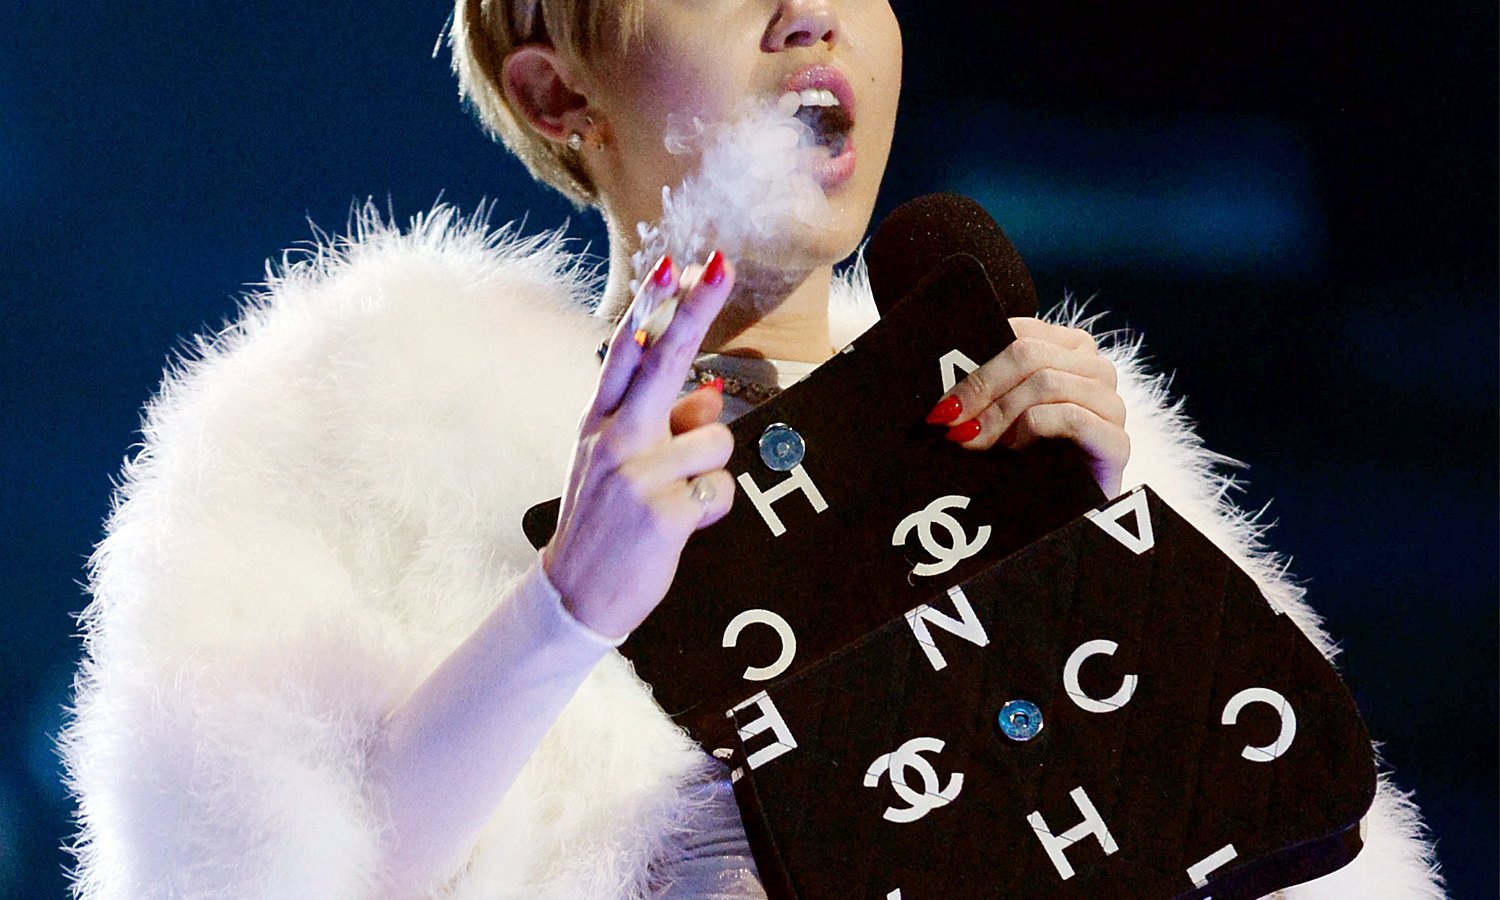 Miley Cyrus smoking a joint at the 2013 MTV EMAs in Amsterdam